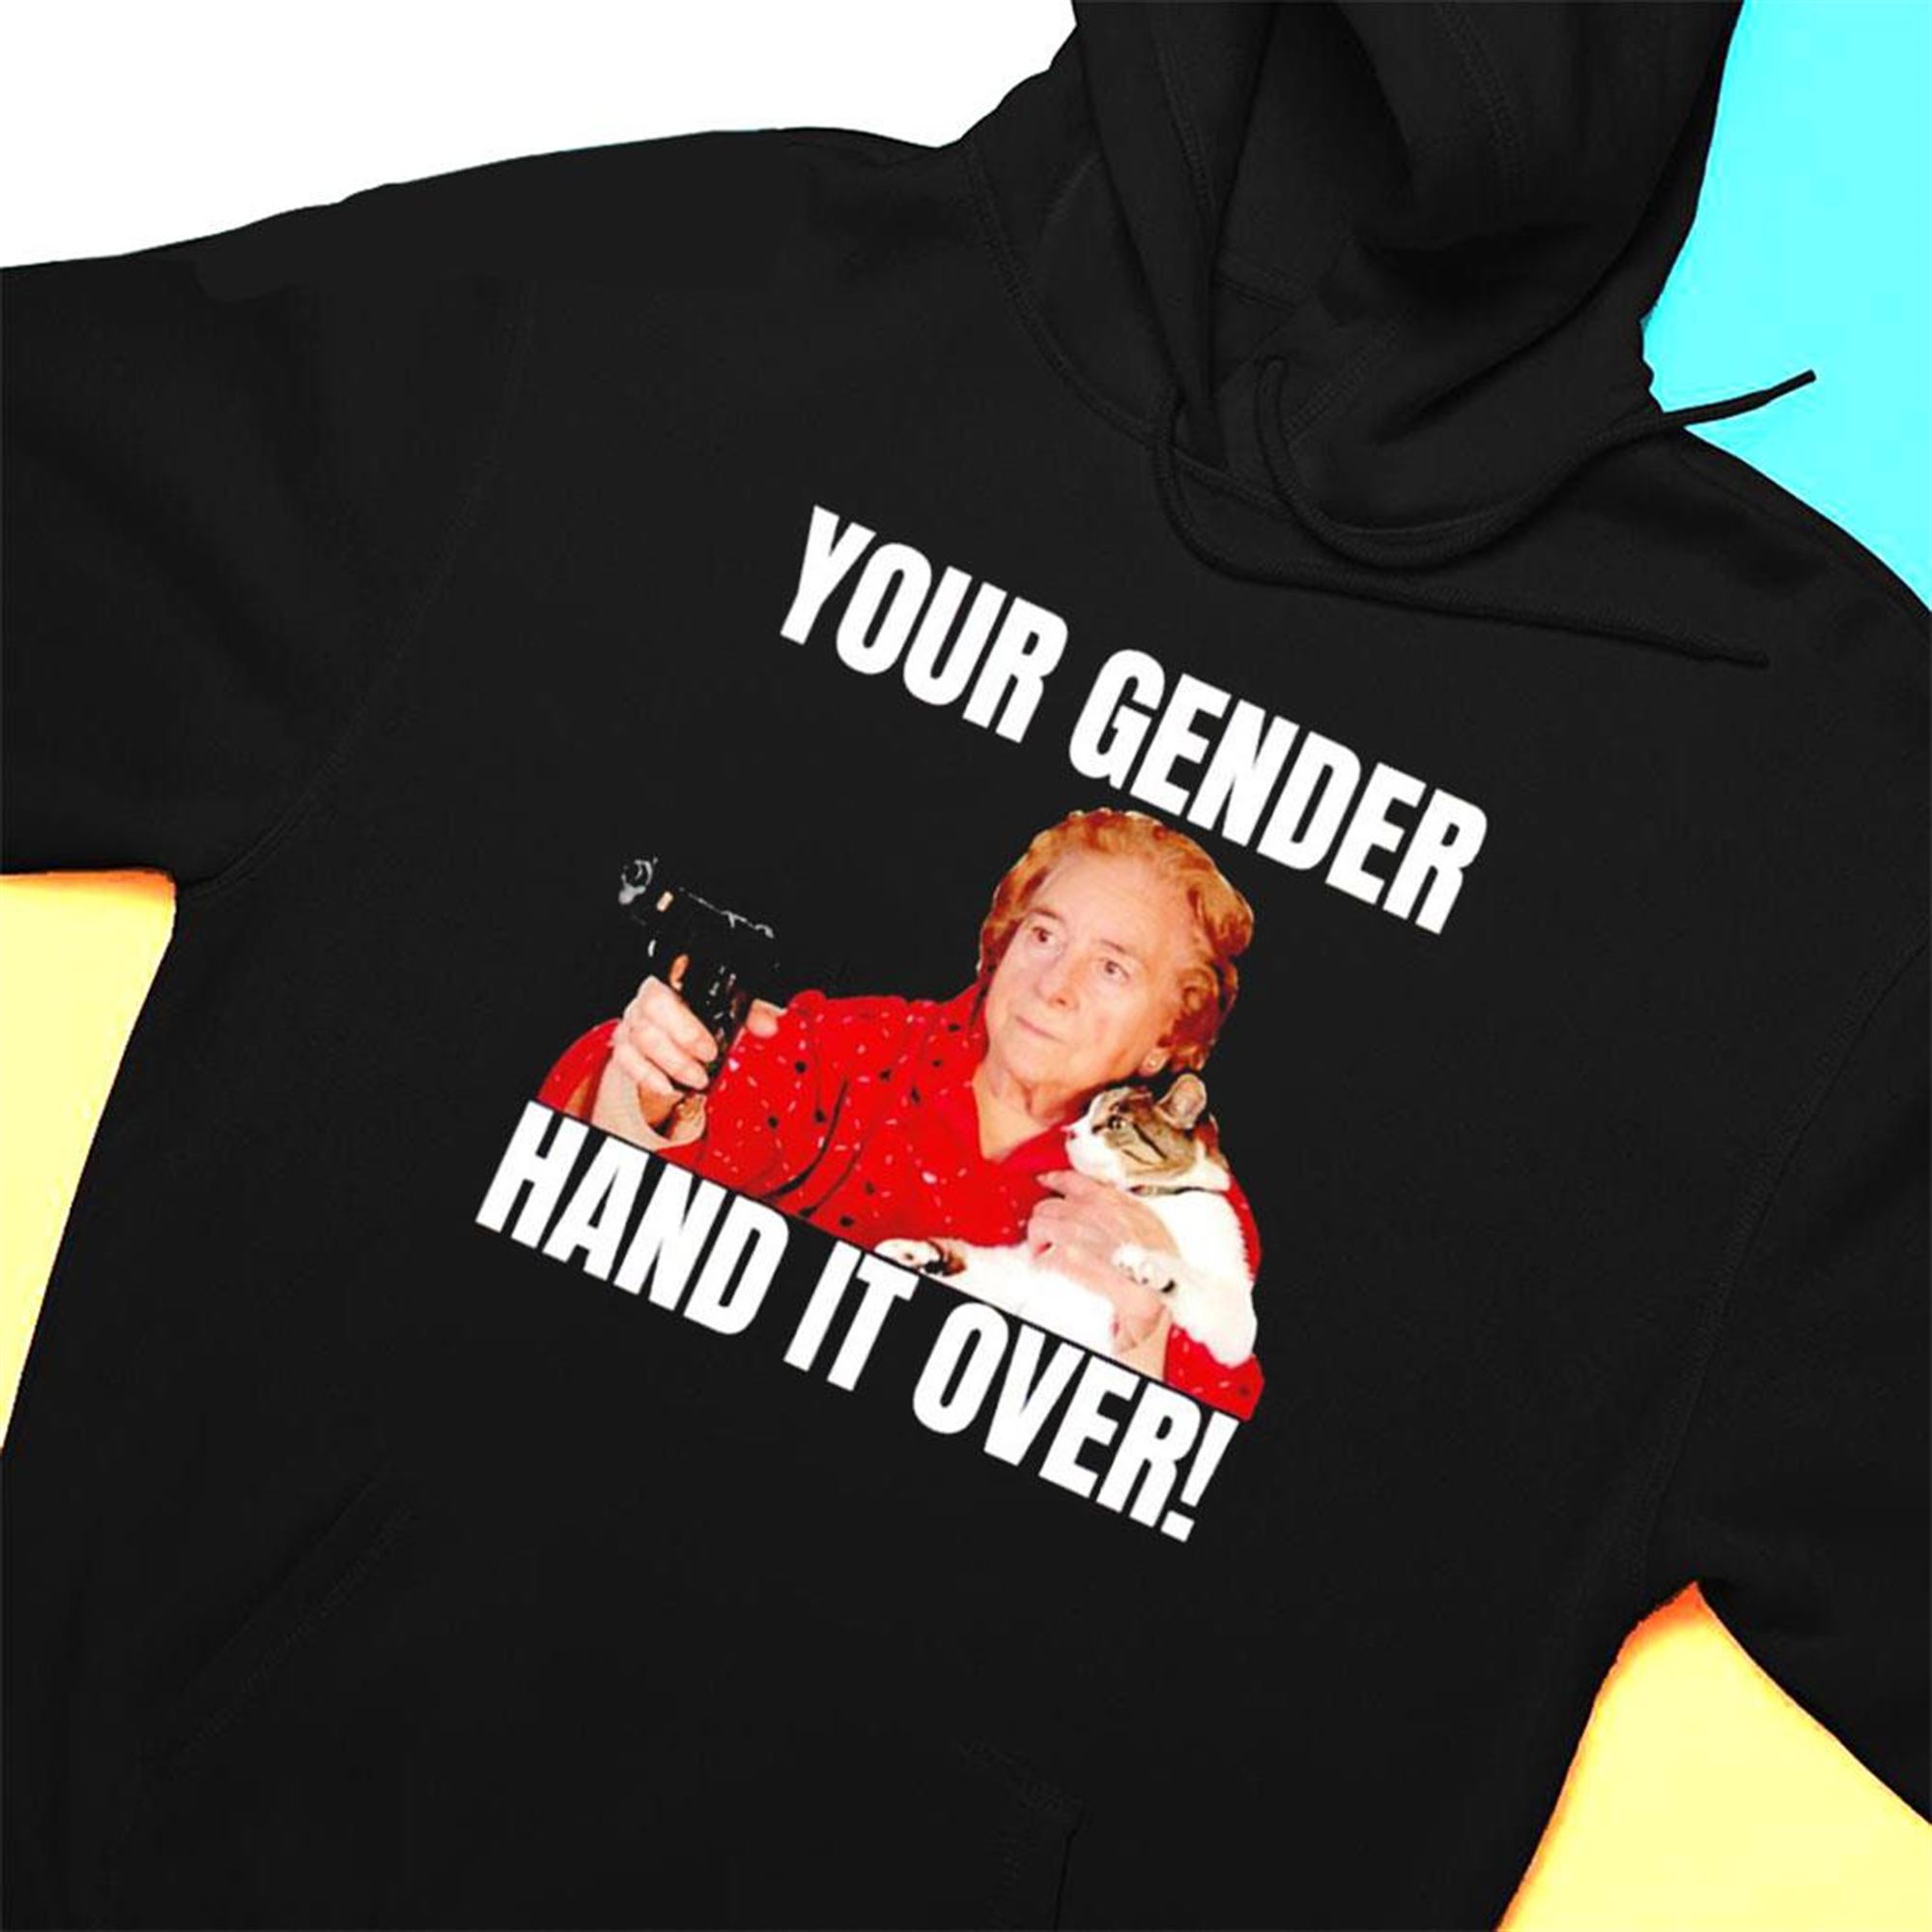 Your Gender Hand It Over Funny